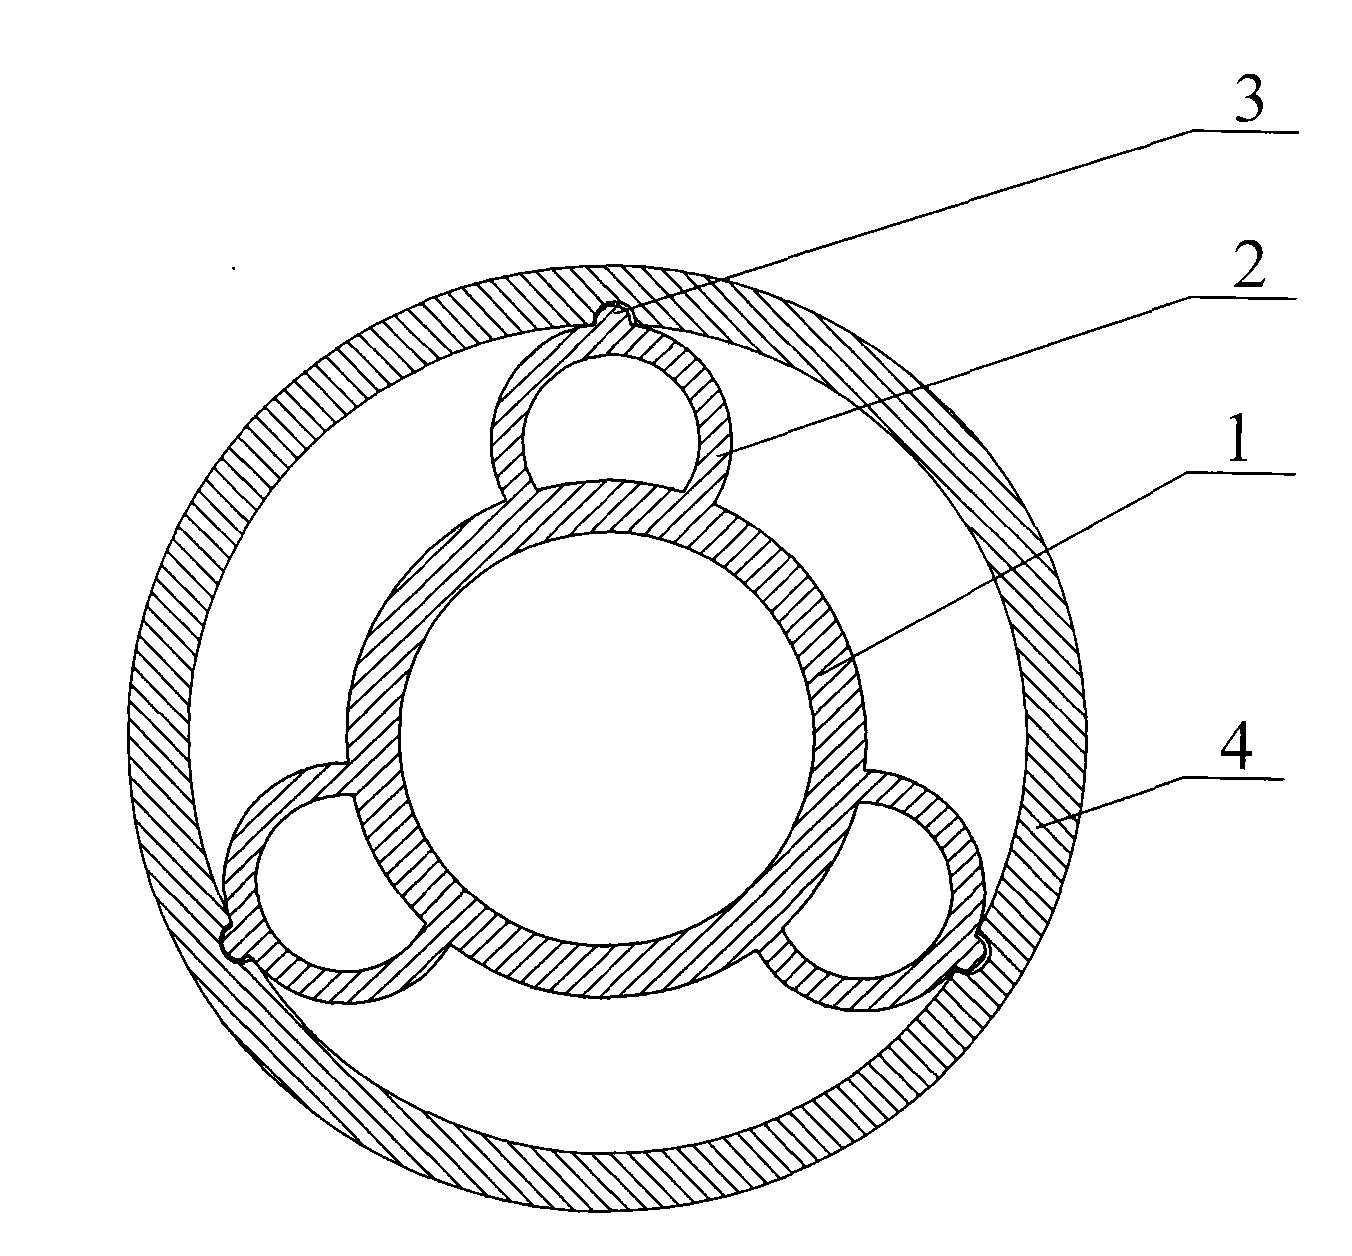 Rotary flexible shaft supporting tube with support blades having double-node cylindrical-annular sections